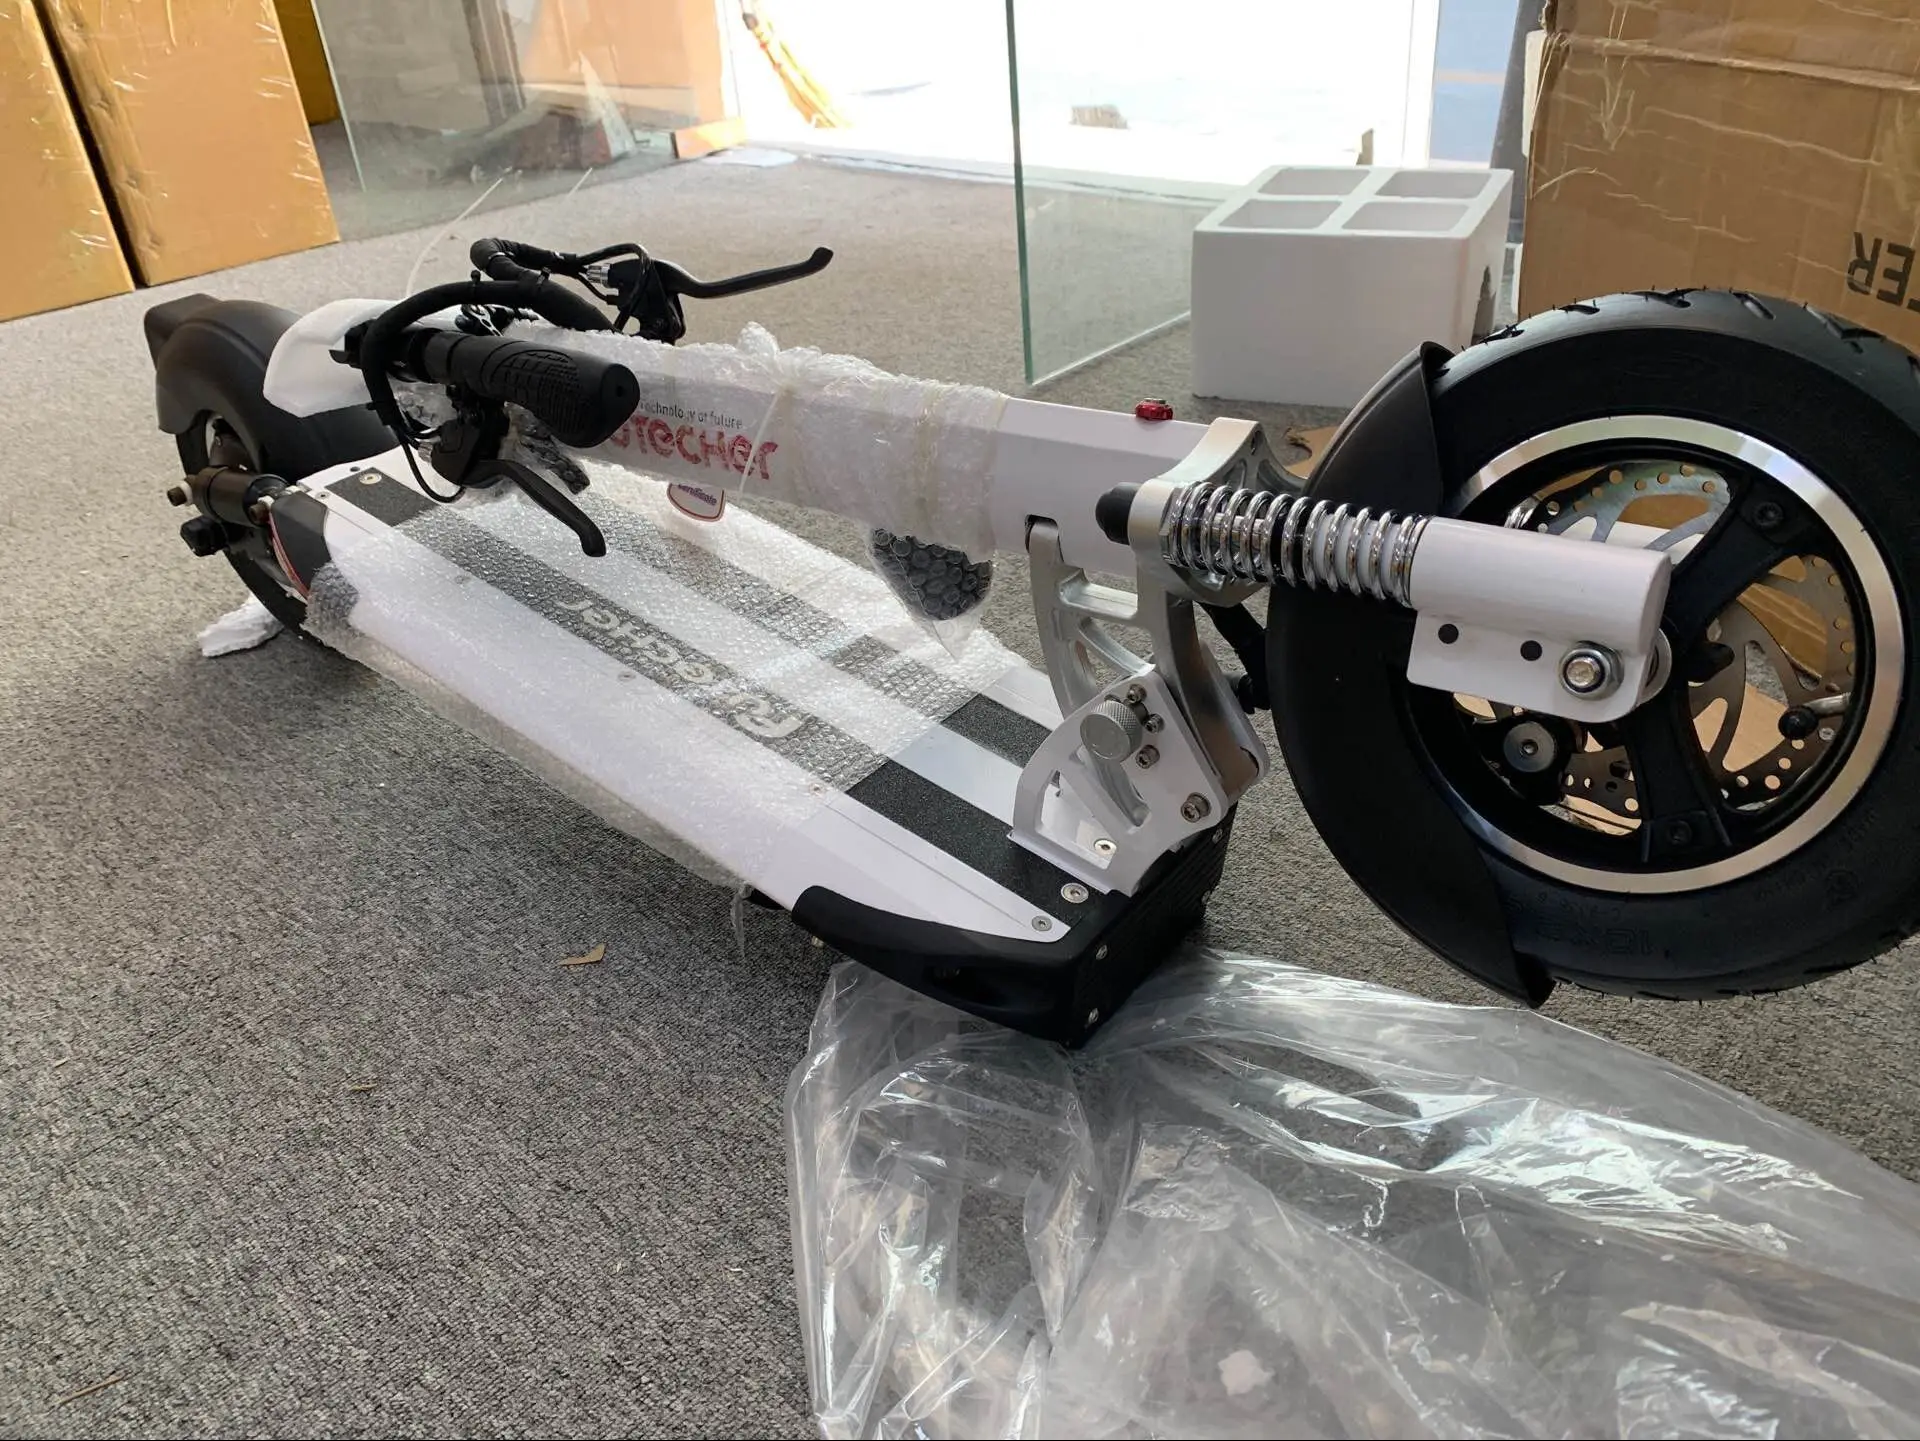 Top SPEEDWAY 5 electric scooter 23AH with Dual Power MAX 3600W AND  Futecher 4  Electric Scooter talent design 52V   1600W 5